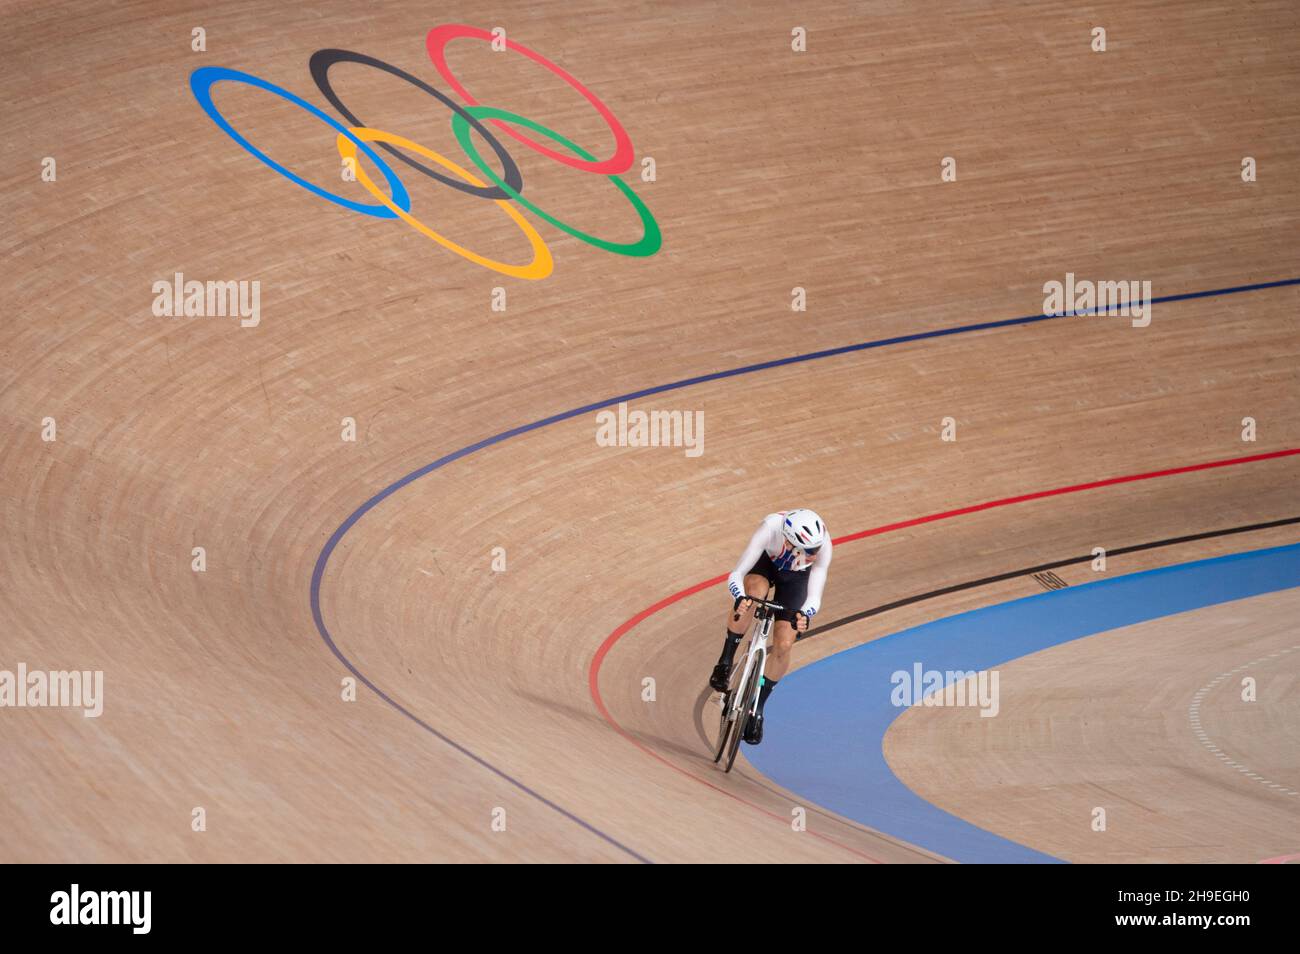 Gavin Hoover during the points race, part of the Omnium event at the Tokyo 2020 Olympic Games Stock Photo